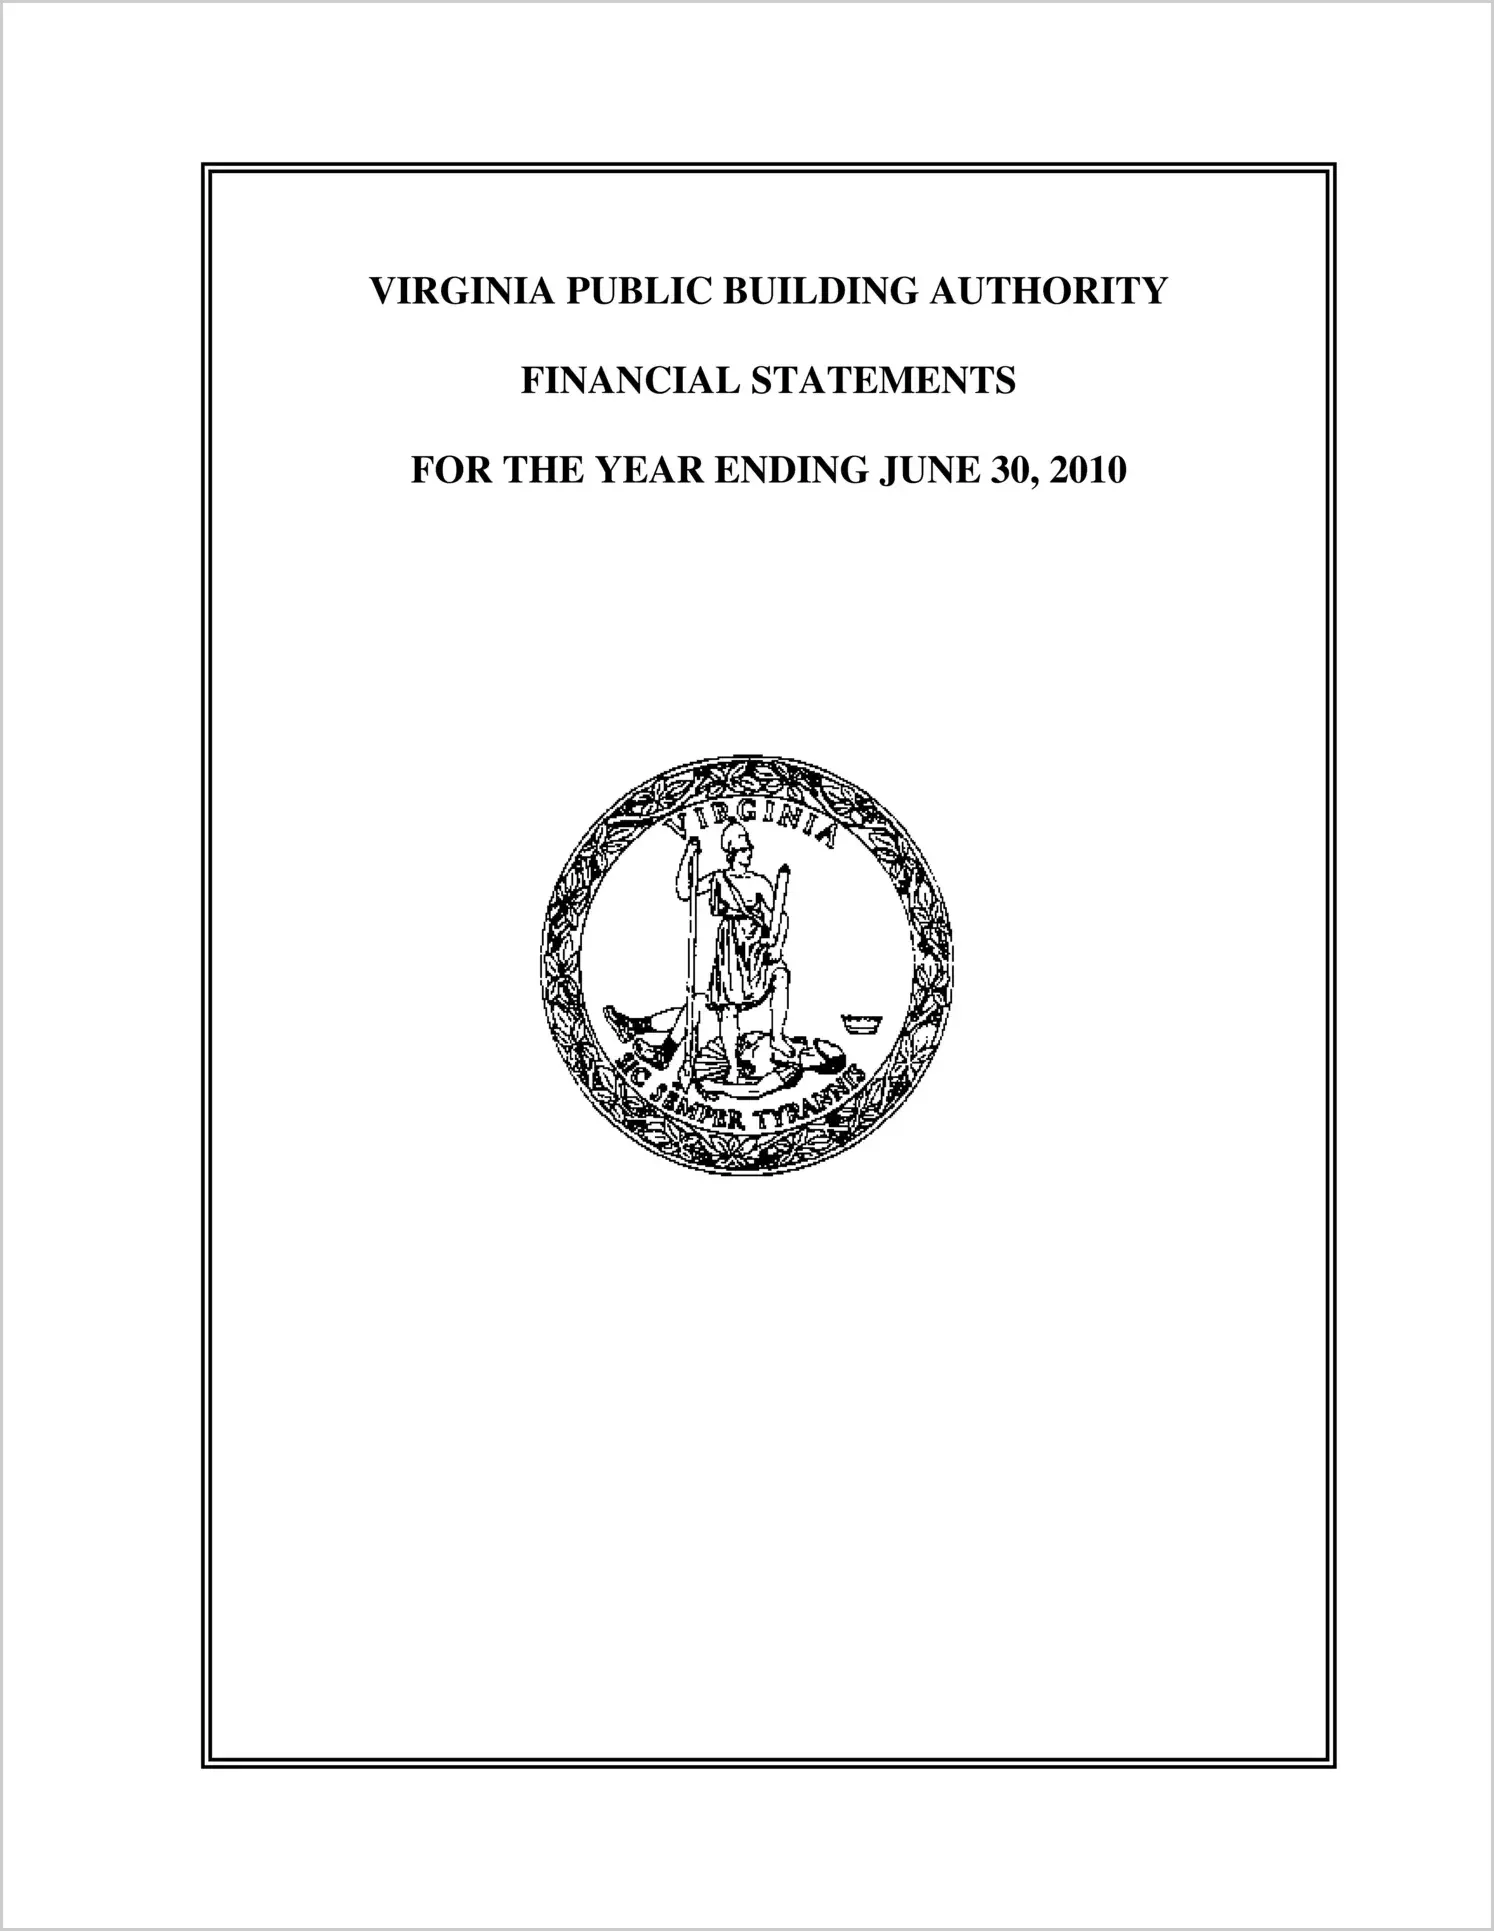 Virginia Public Building Authority Financial Statements for the year ended June 30, 2010